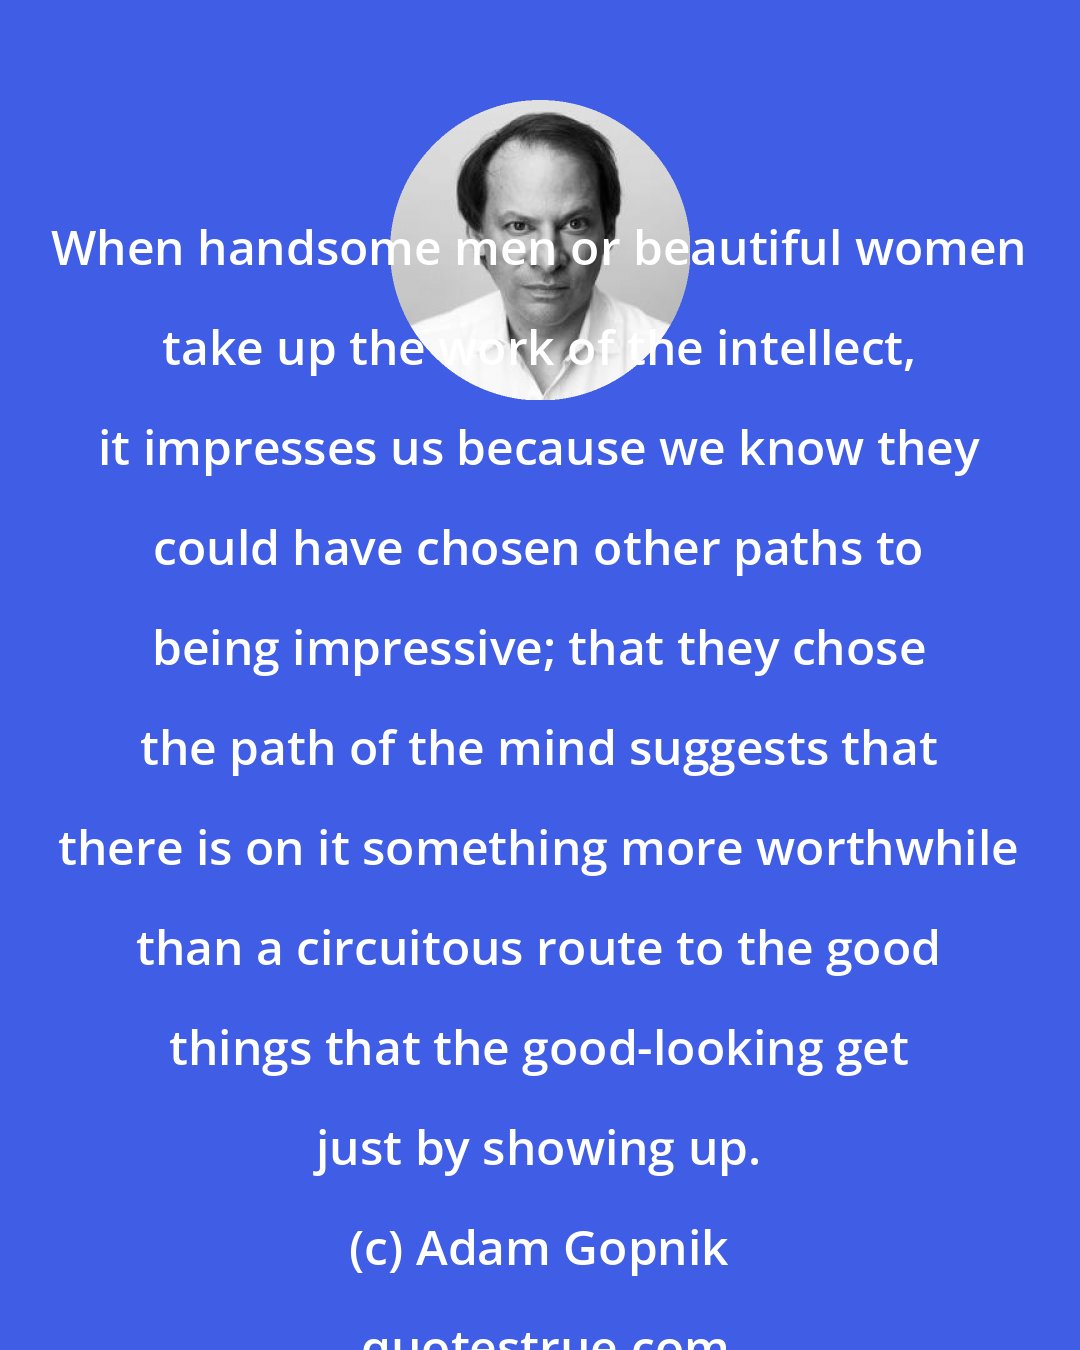 Adam Gopnik: When handsome men or beautiful women take up the work of the intellect, it impresses us because we know they could have chosen other paths to being impressive; that they chose the path of the mind suggests that there is on it something more worthwhile than a circuitous route to the good things that the good-looking get just by showing up.